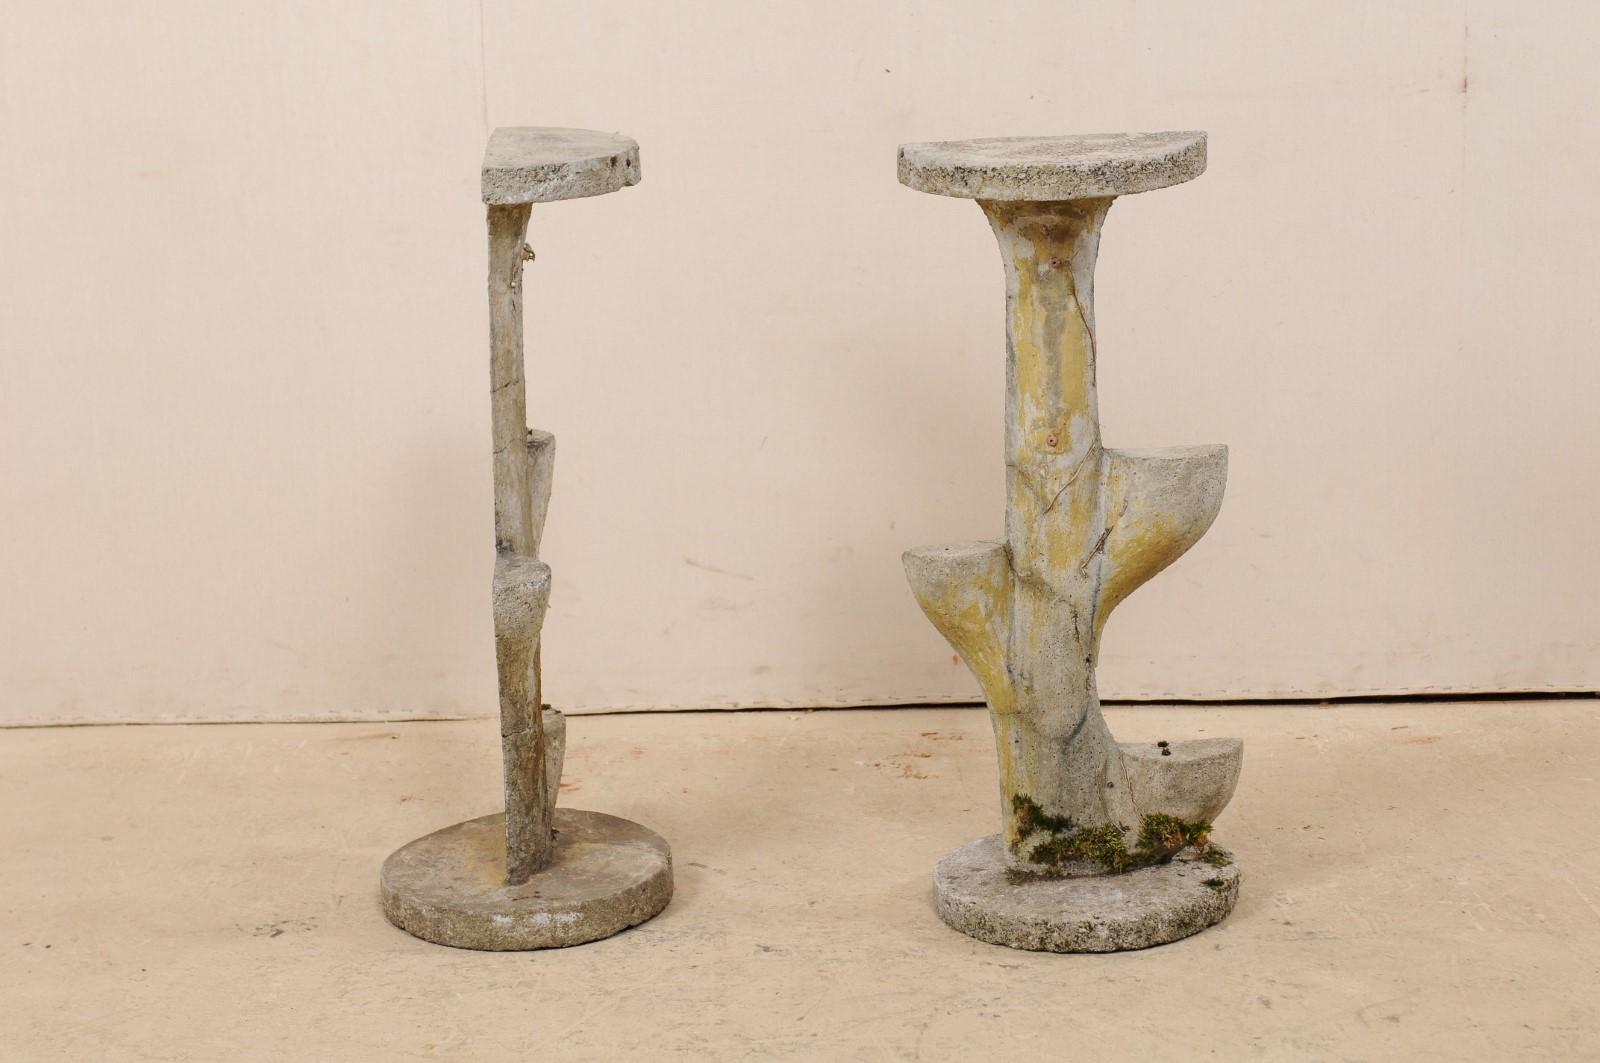 Cast Stone Pair of French Garden Sculptural Accents, Mid-20th Century